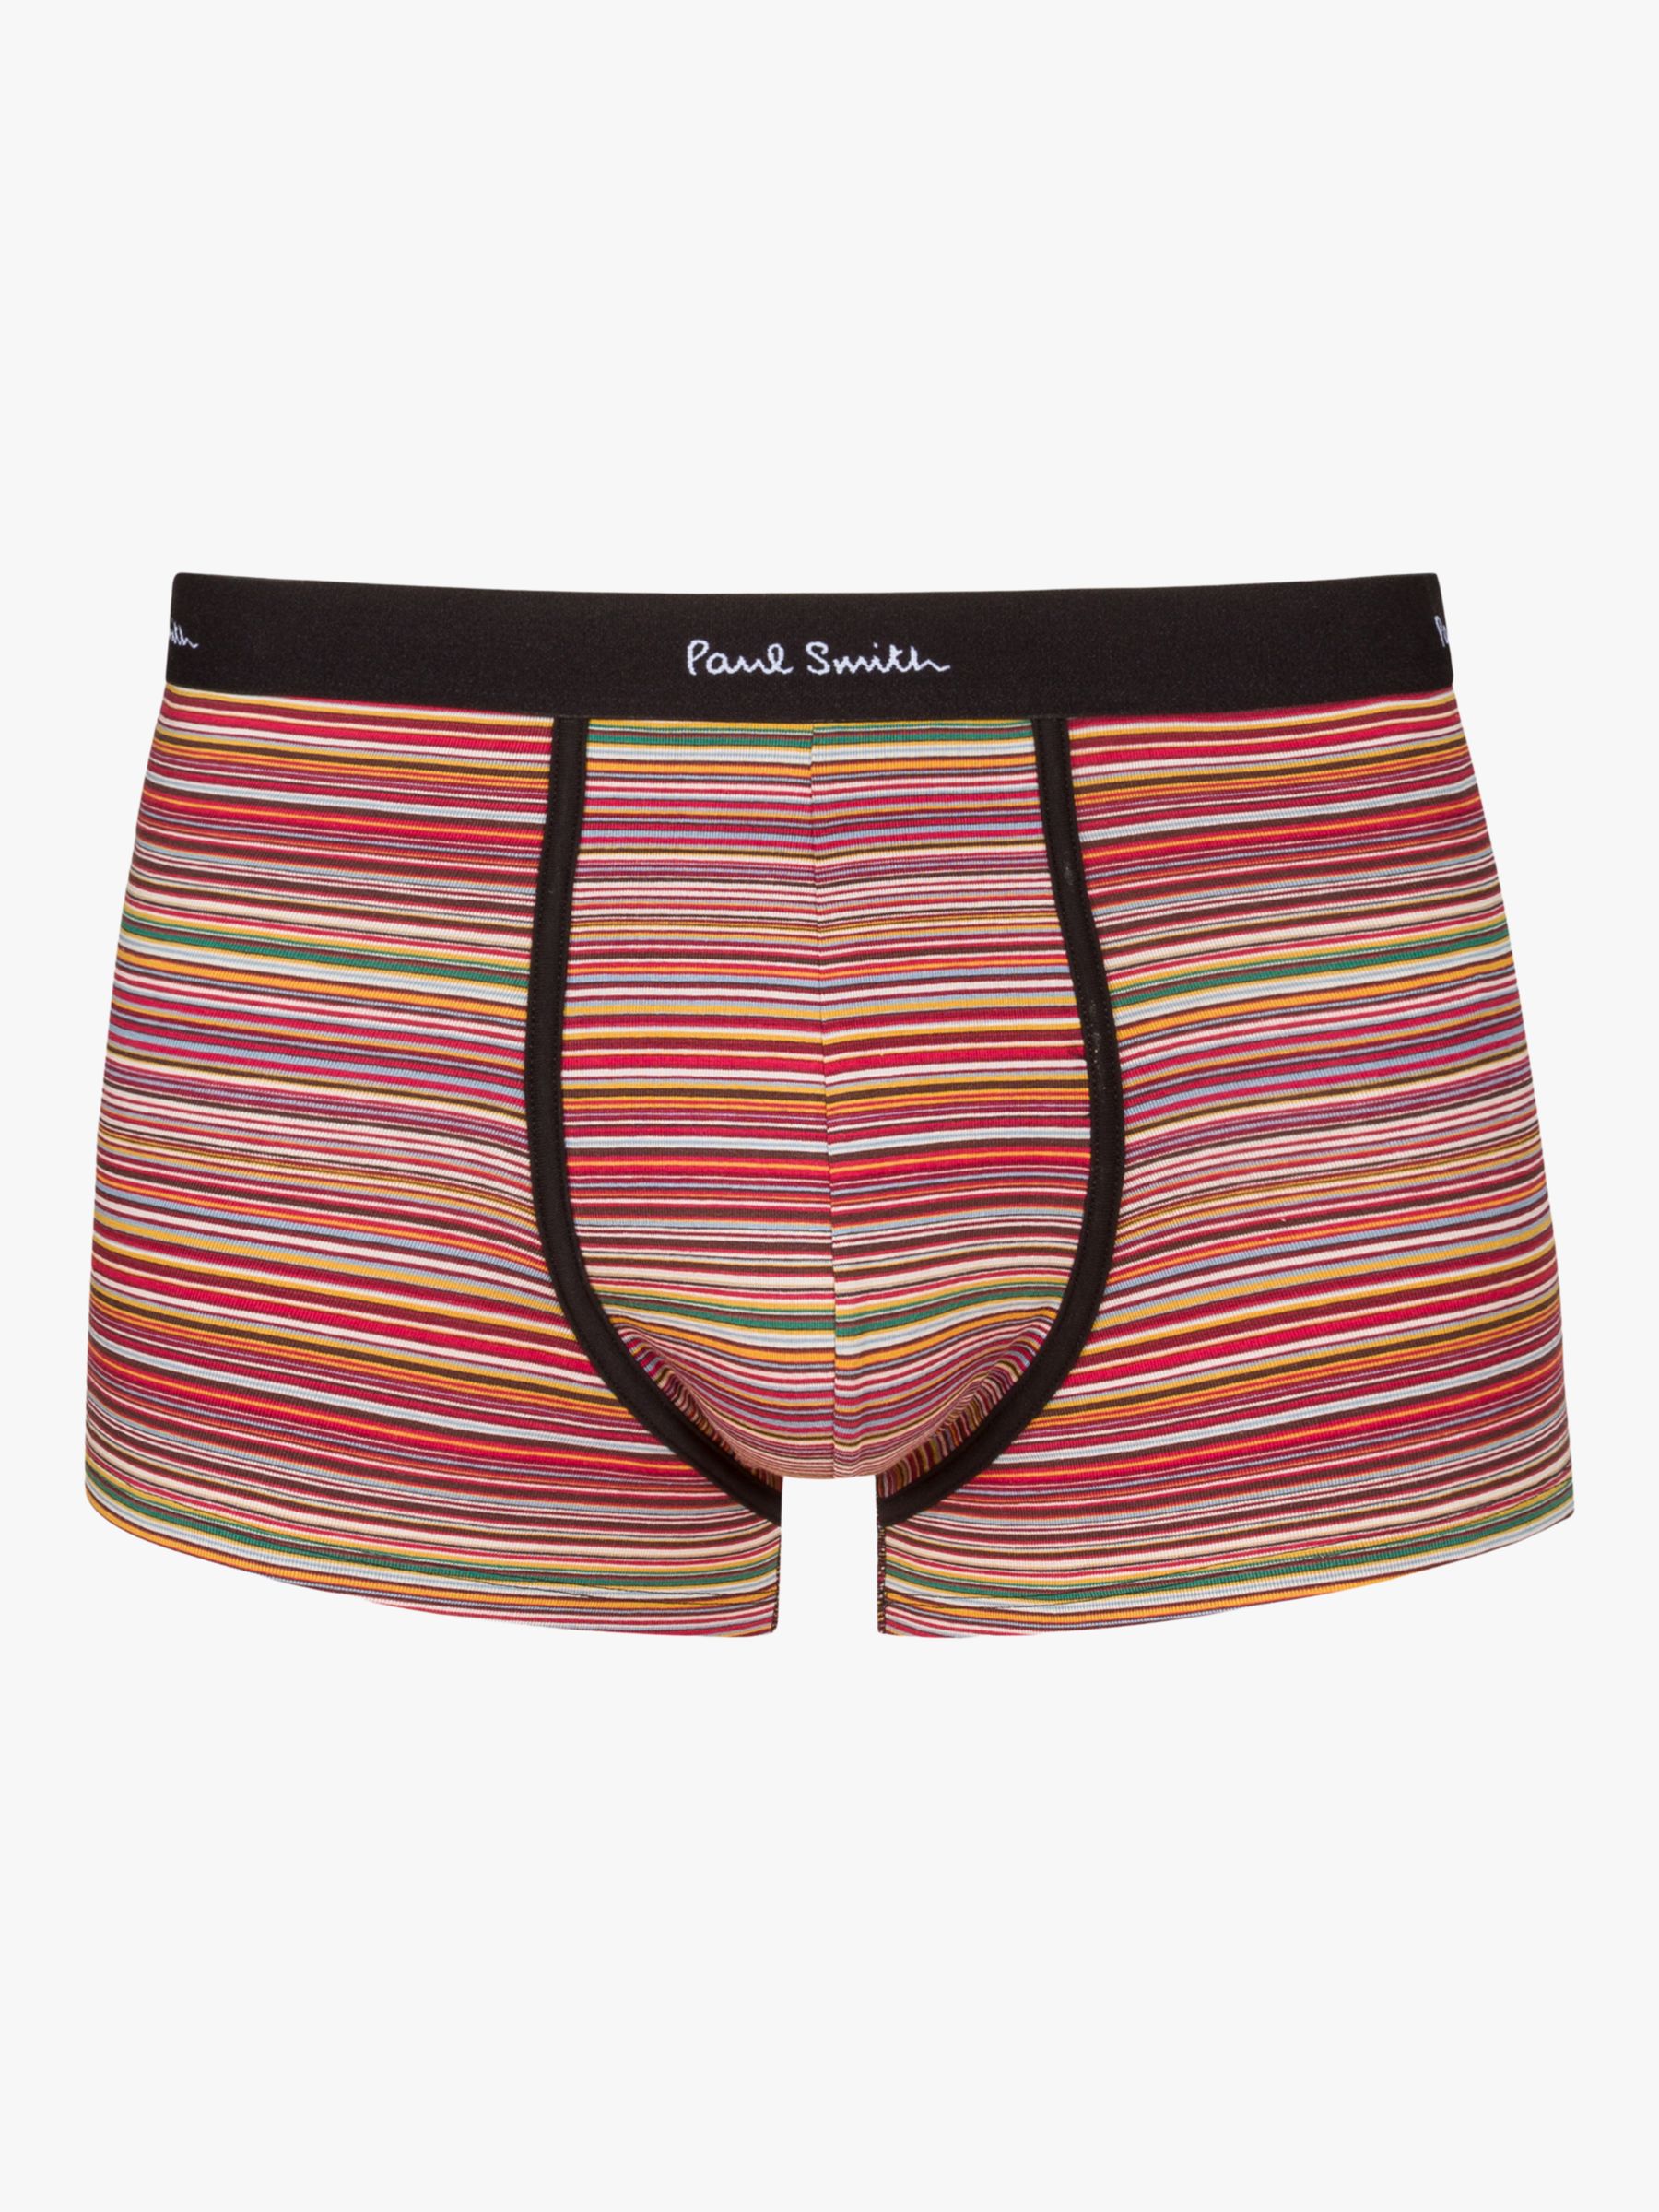 Paul Smith Organic Cotton Stripe Boxers, Pack of 3, Red/Multi, L